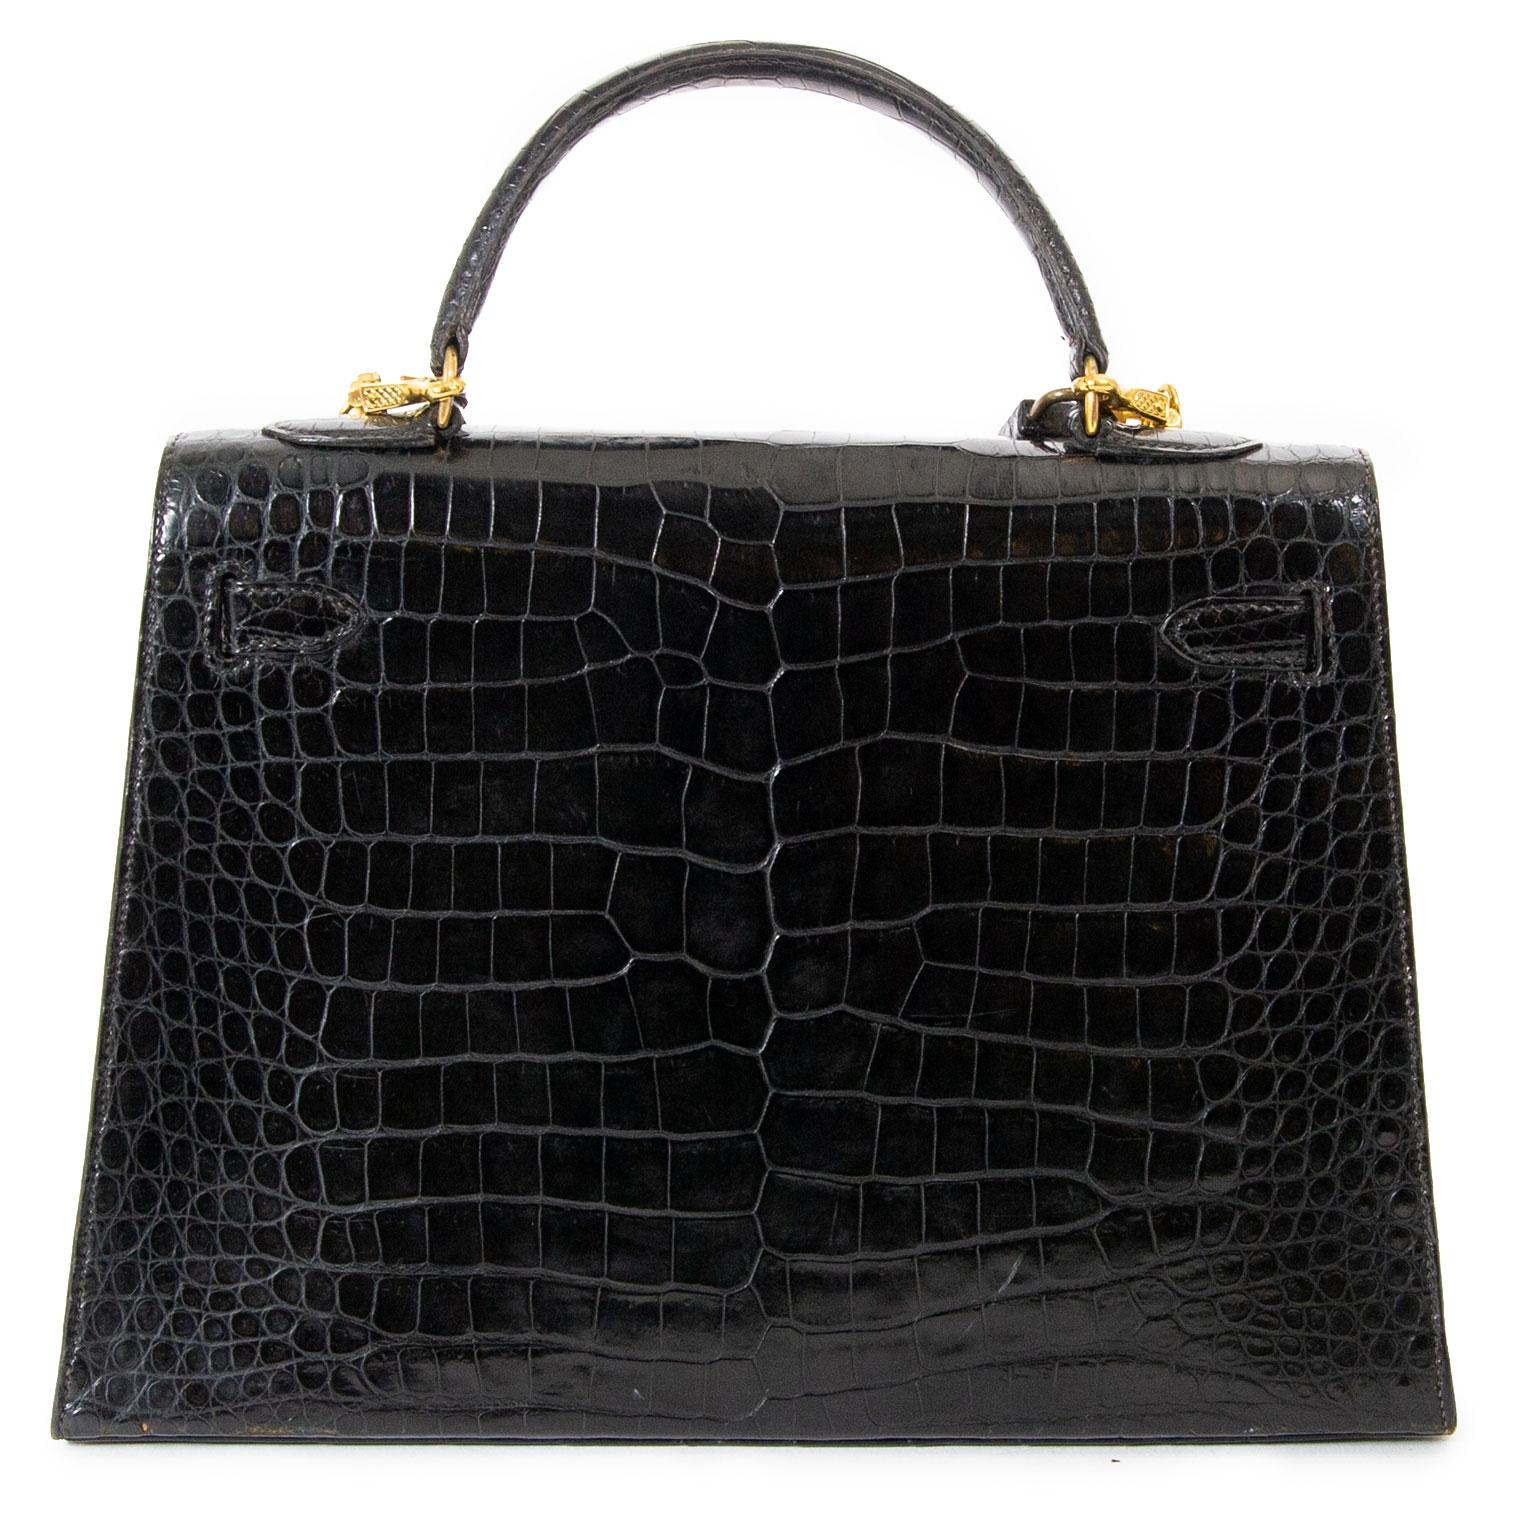 The epitome of chicness in the form of a bag, this iconic Hermès Kelly in precious crocodile skin is a true beauty. 
The black color makes it extremely versatile and easy to coordinate with any outfit. 
The gold hardware accentuates this bag to